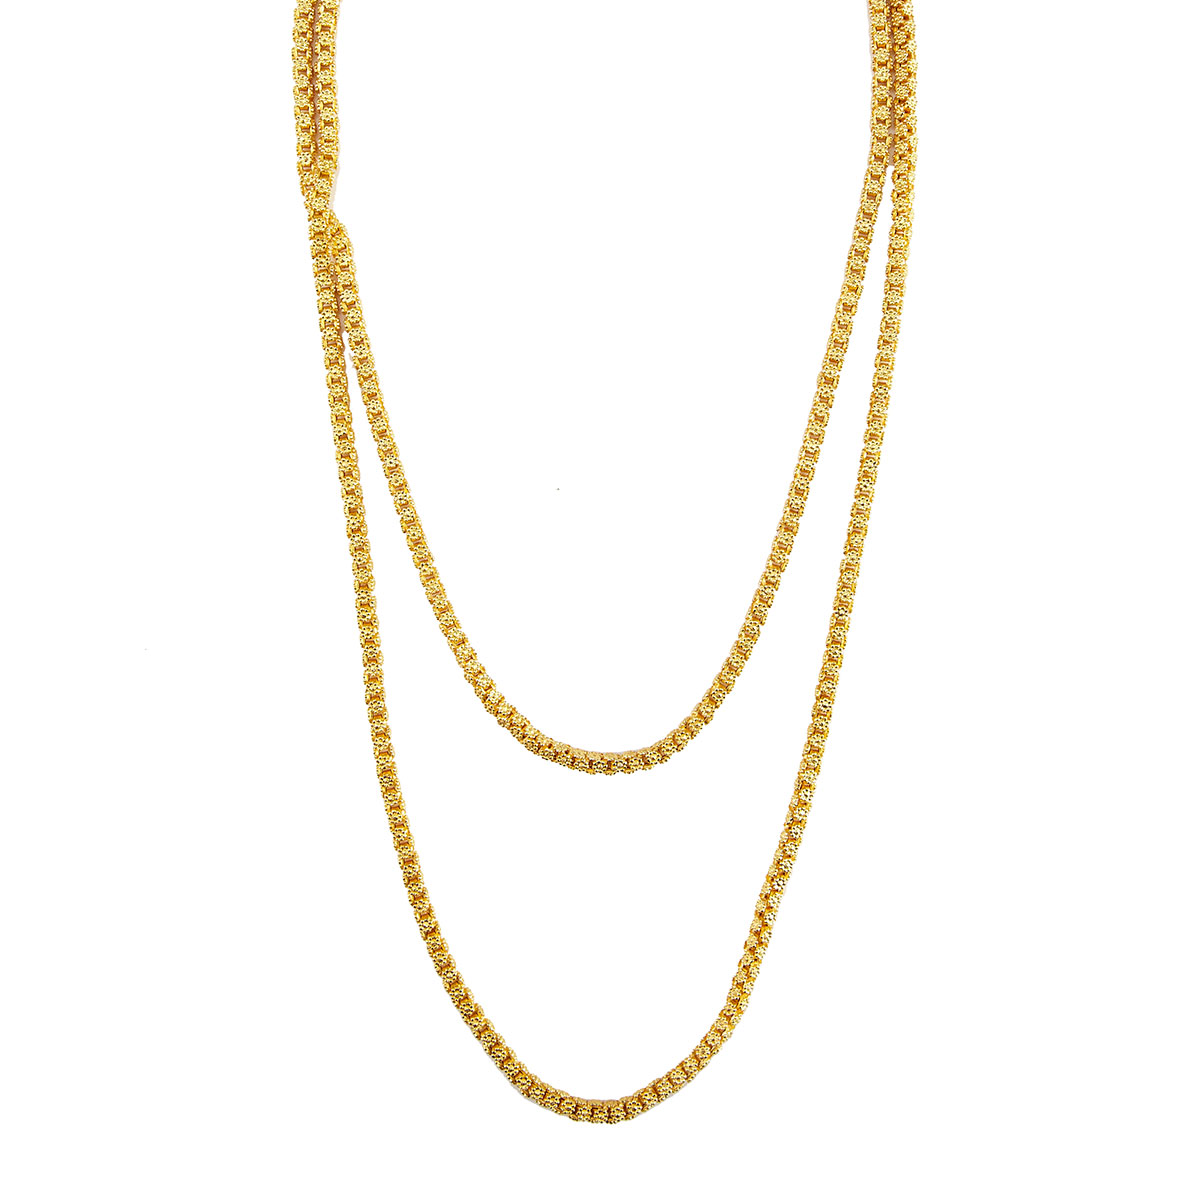 Maltese 18k Yellow Gold Chain    formed